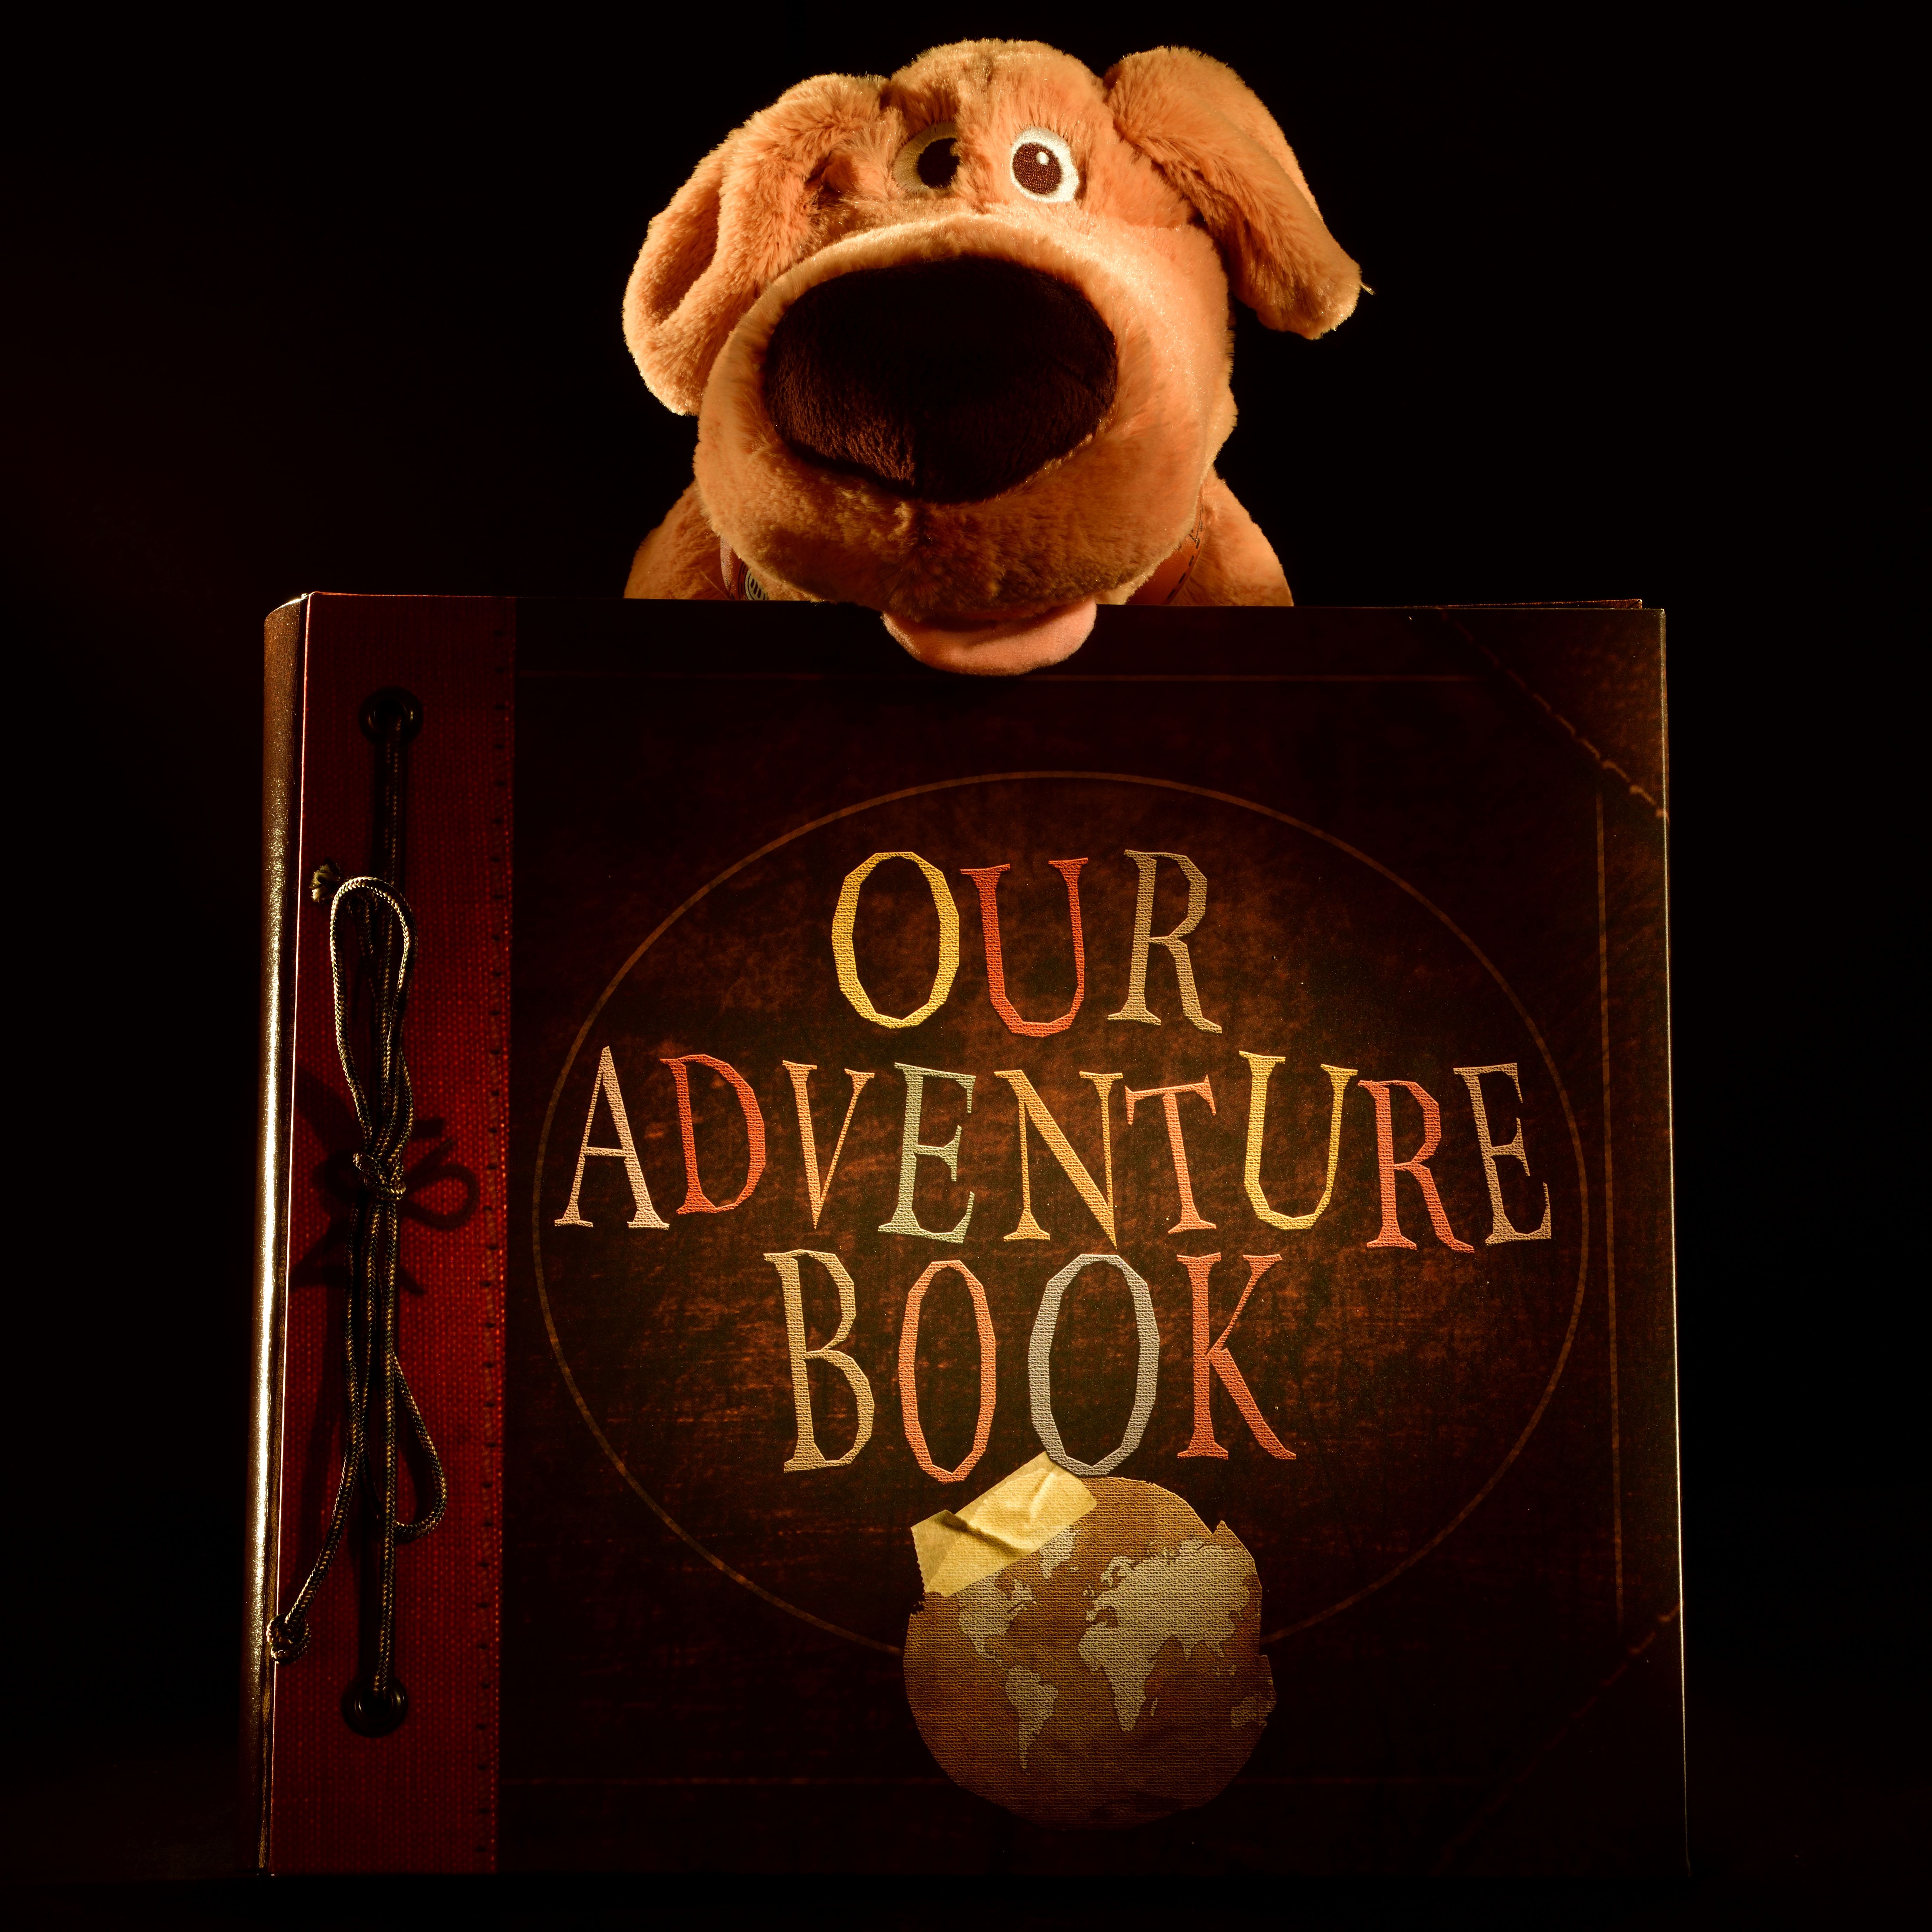 Dug and his adventure book.